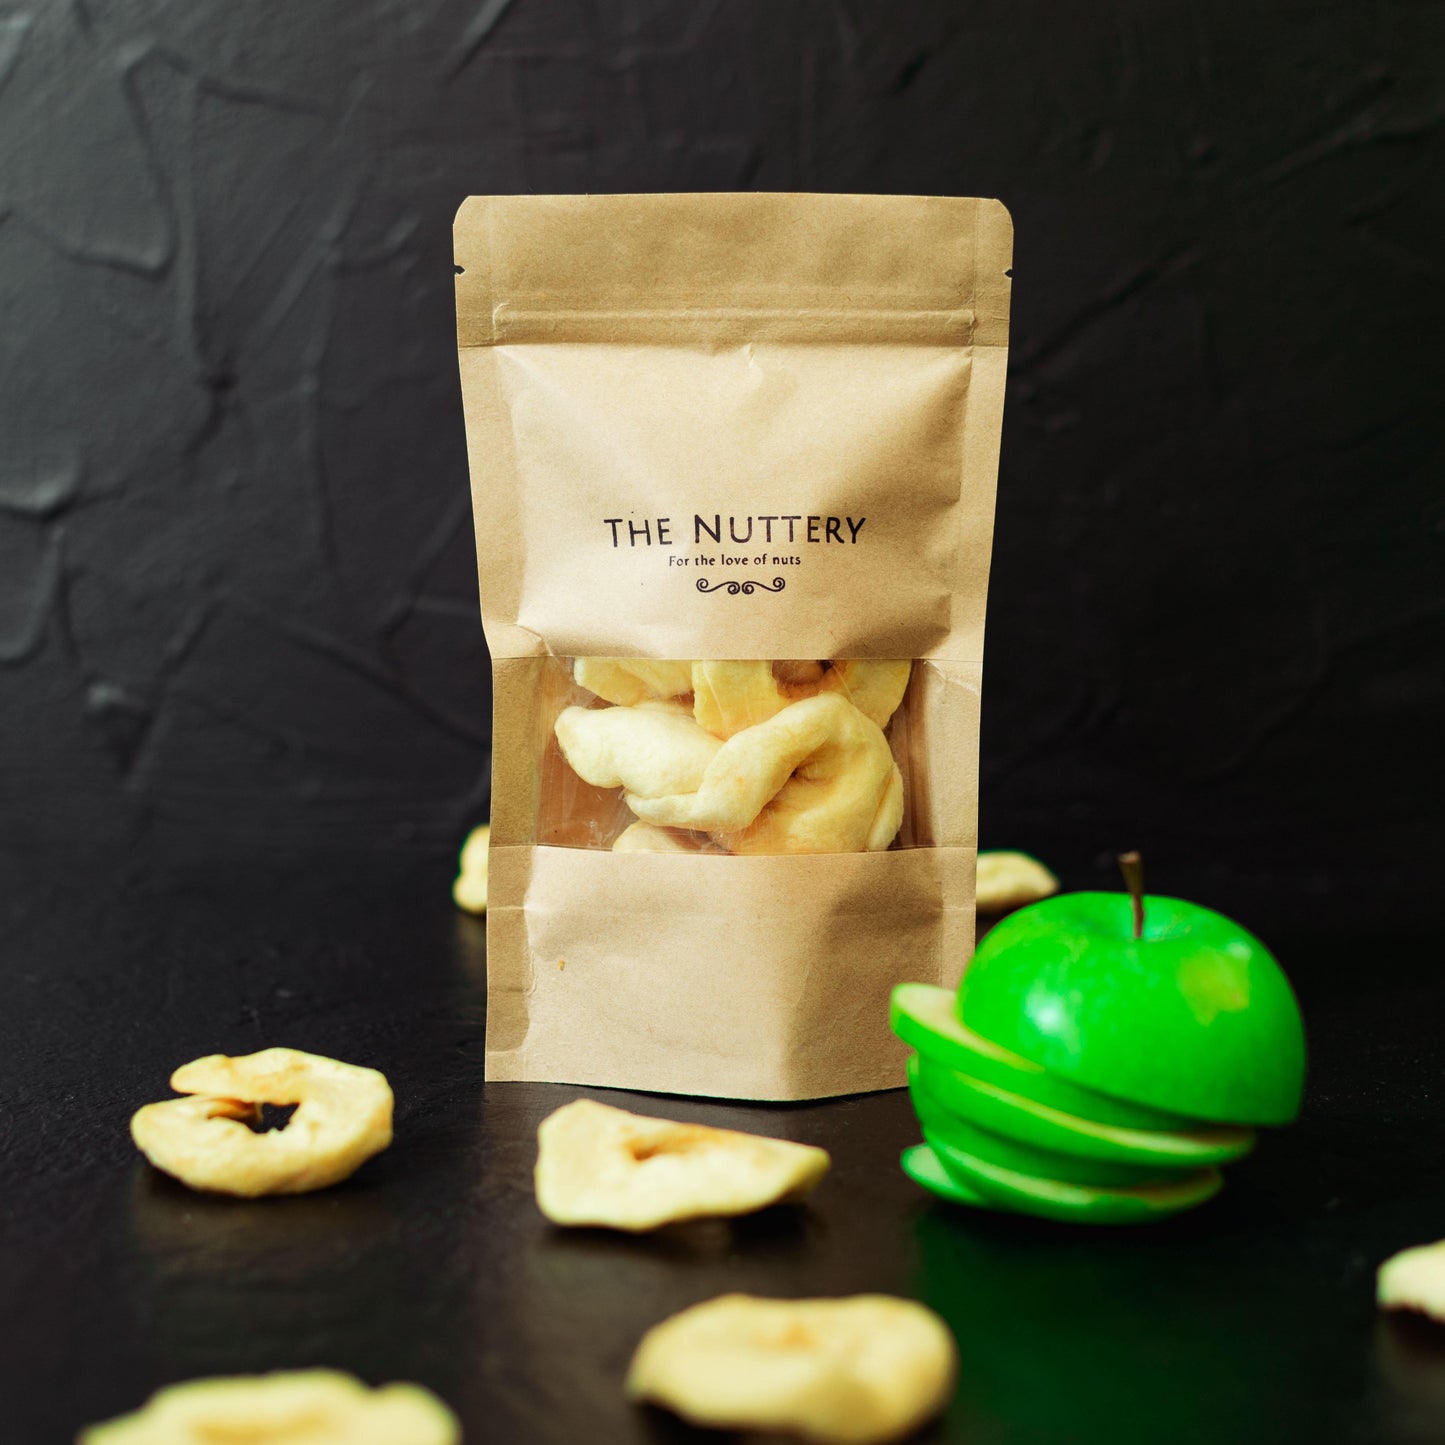 Dried Apples - The Nuttery